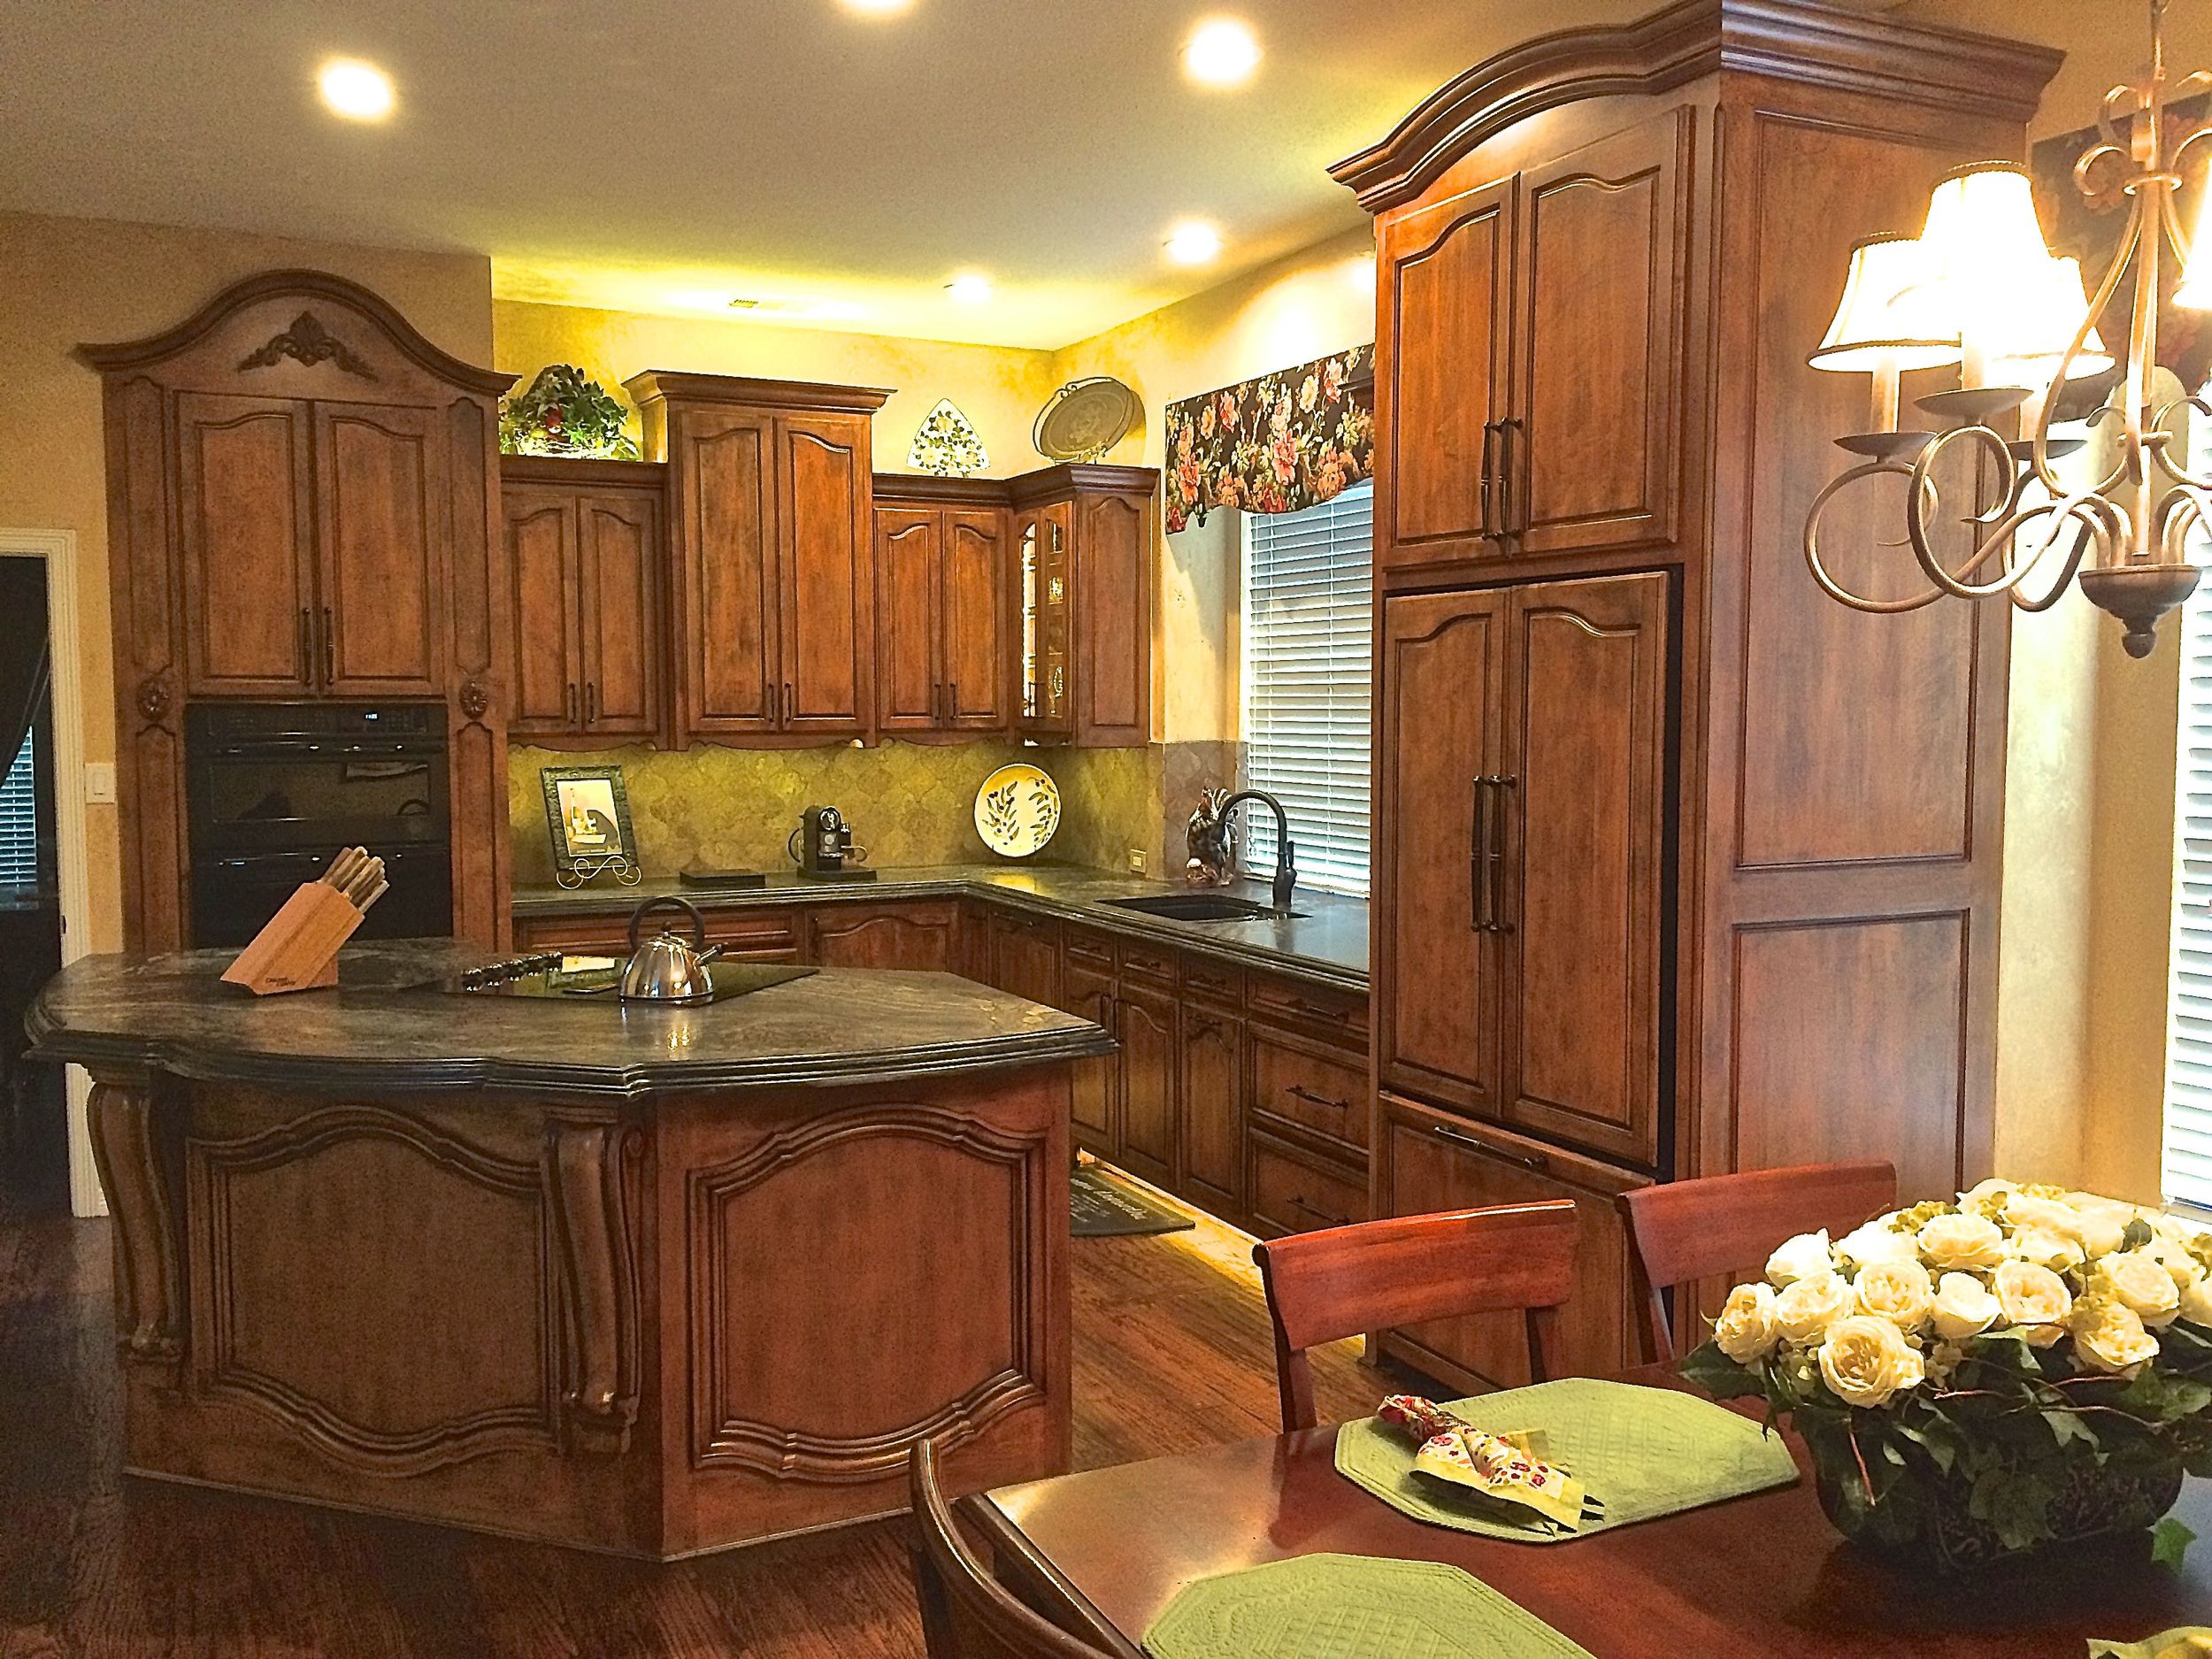 Custom Kitchens You Choose The Style I Ll Build In The Quality